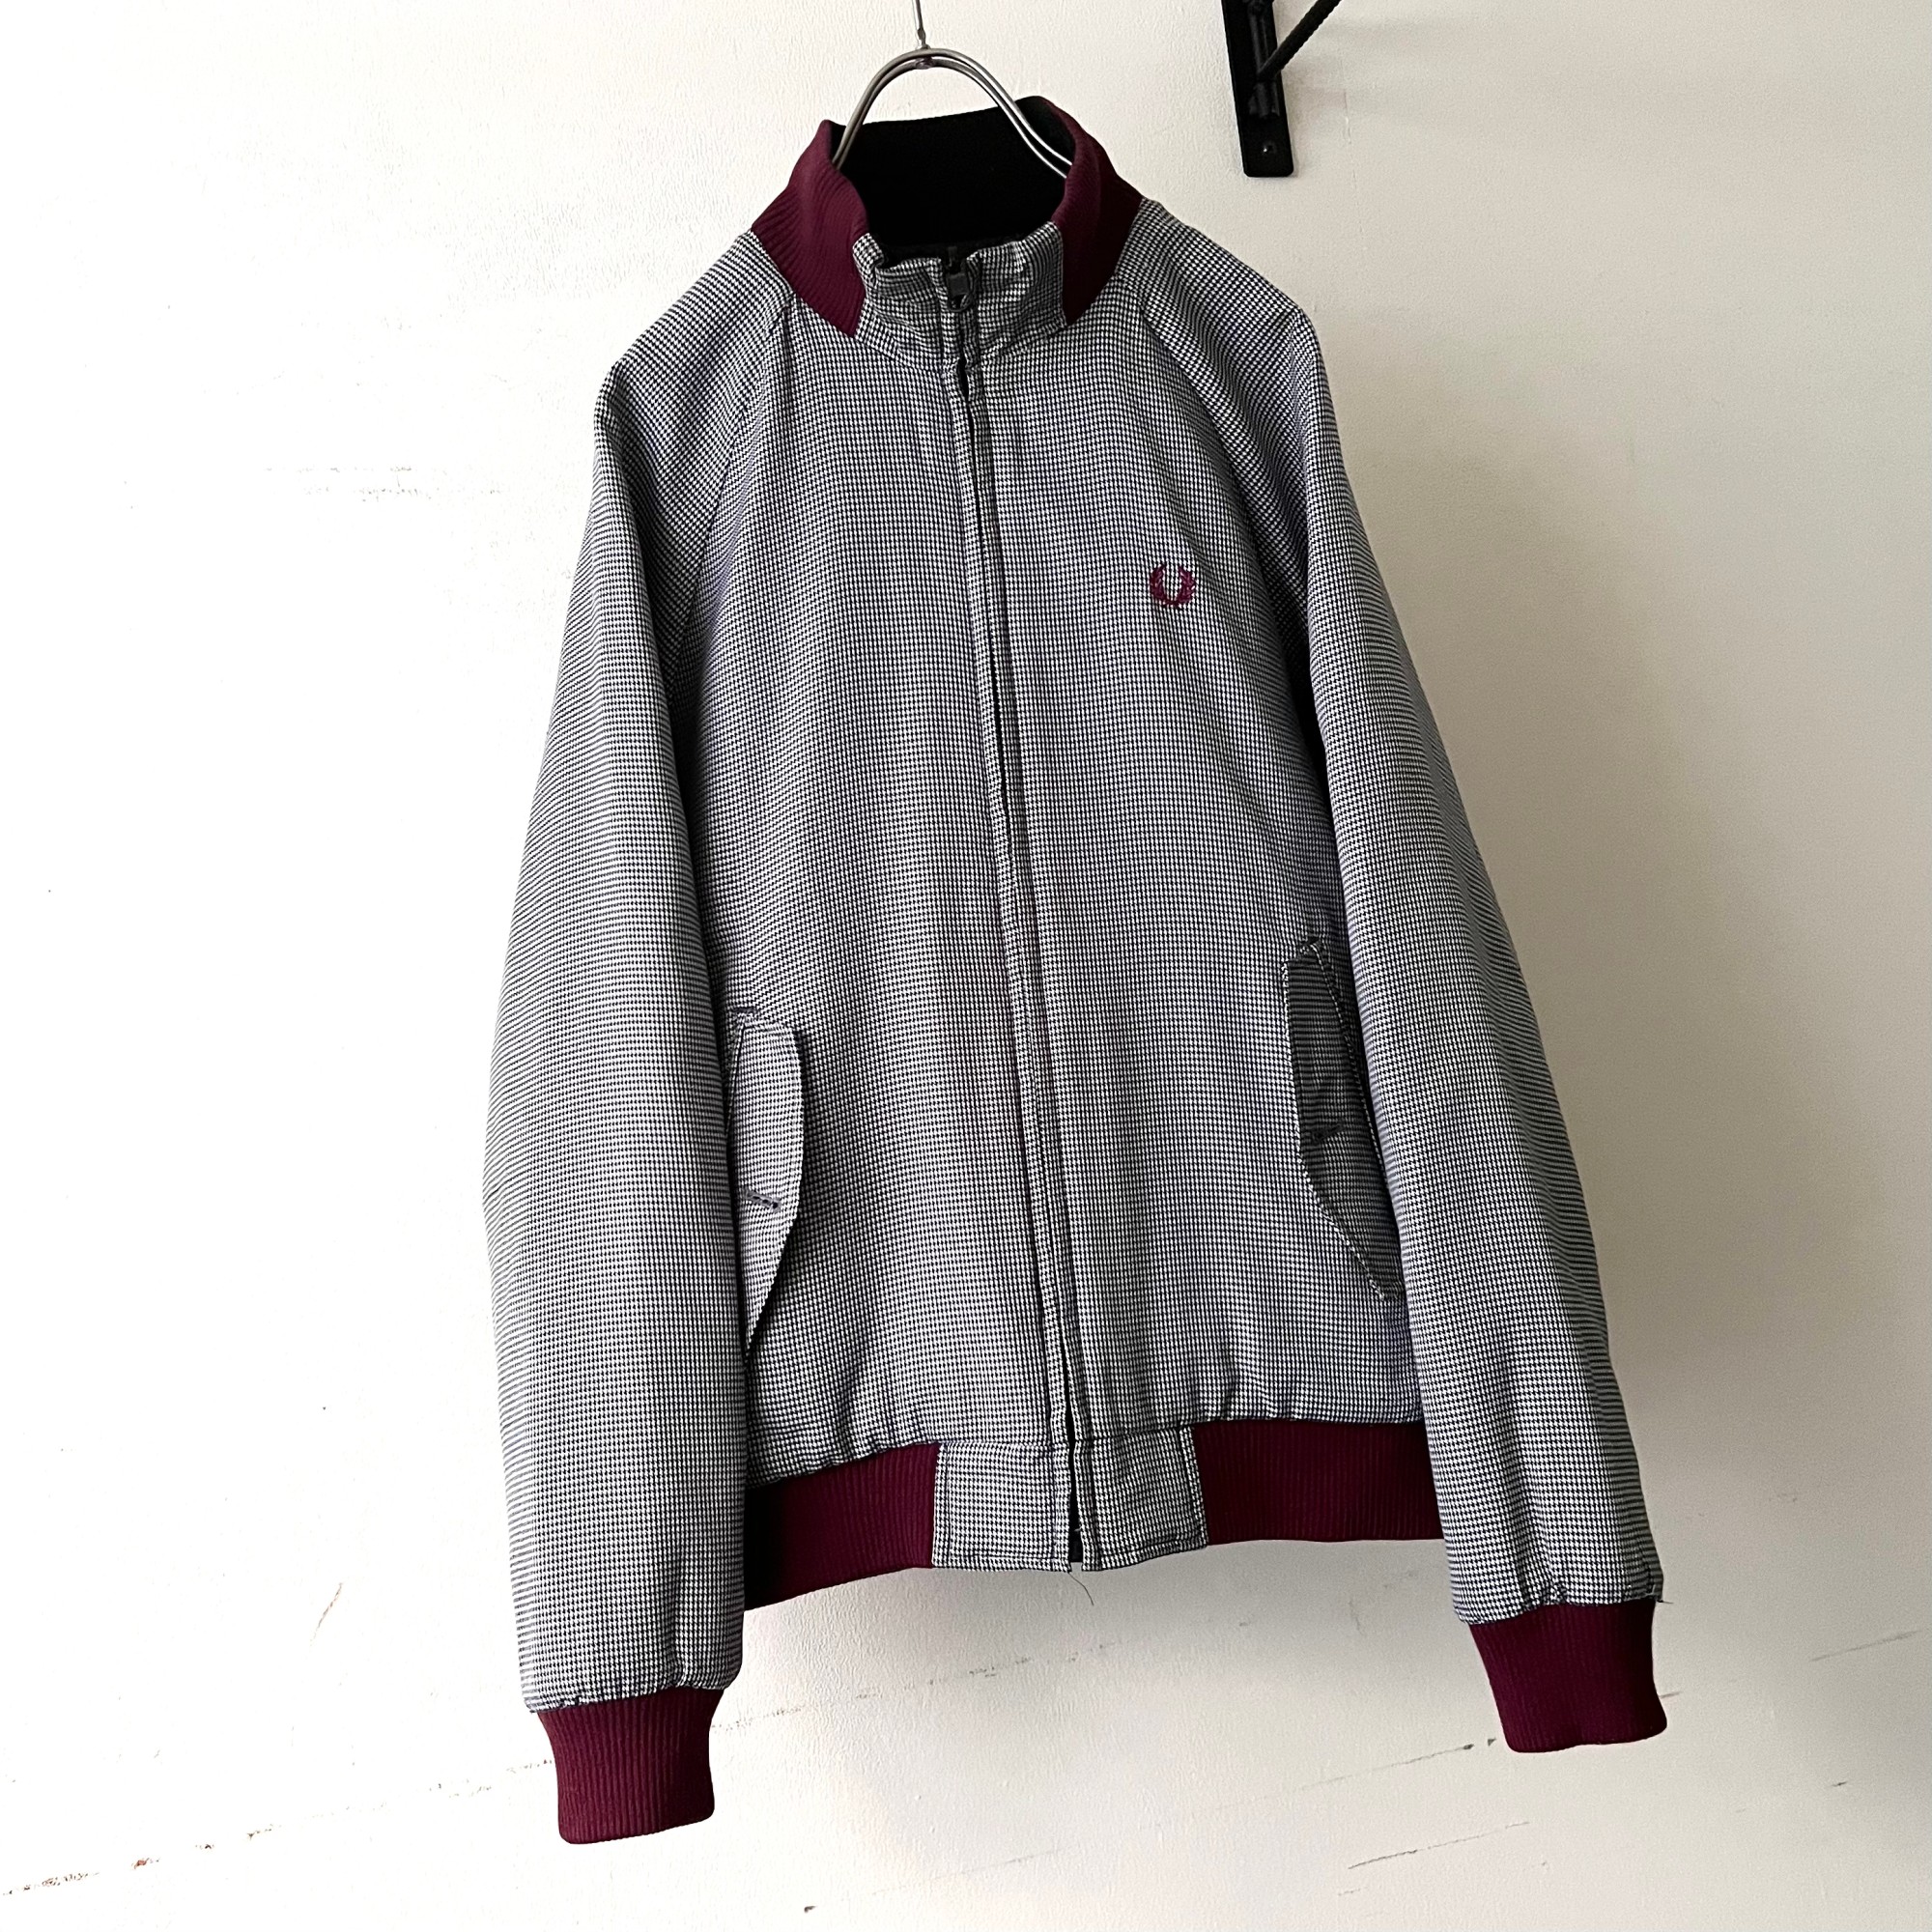 FRED PERRY Logo Reversible JKT